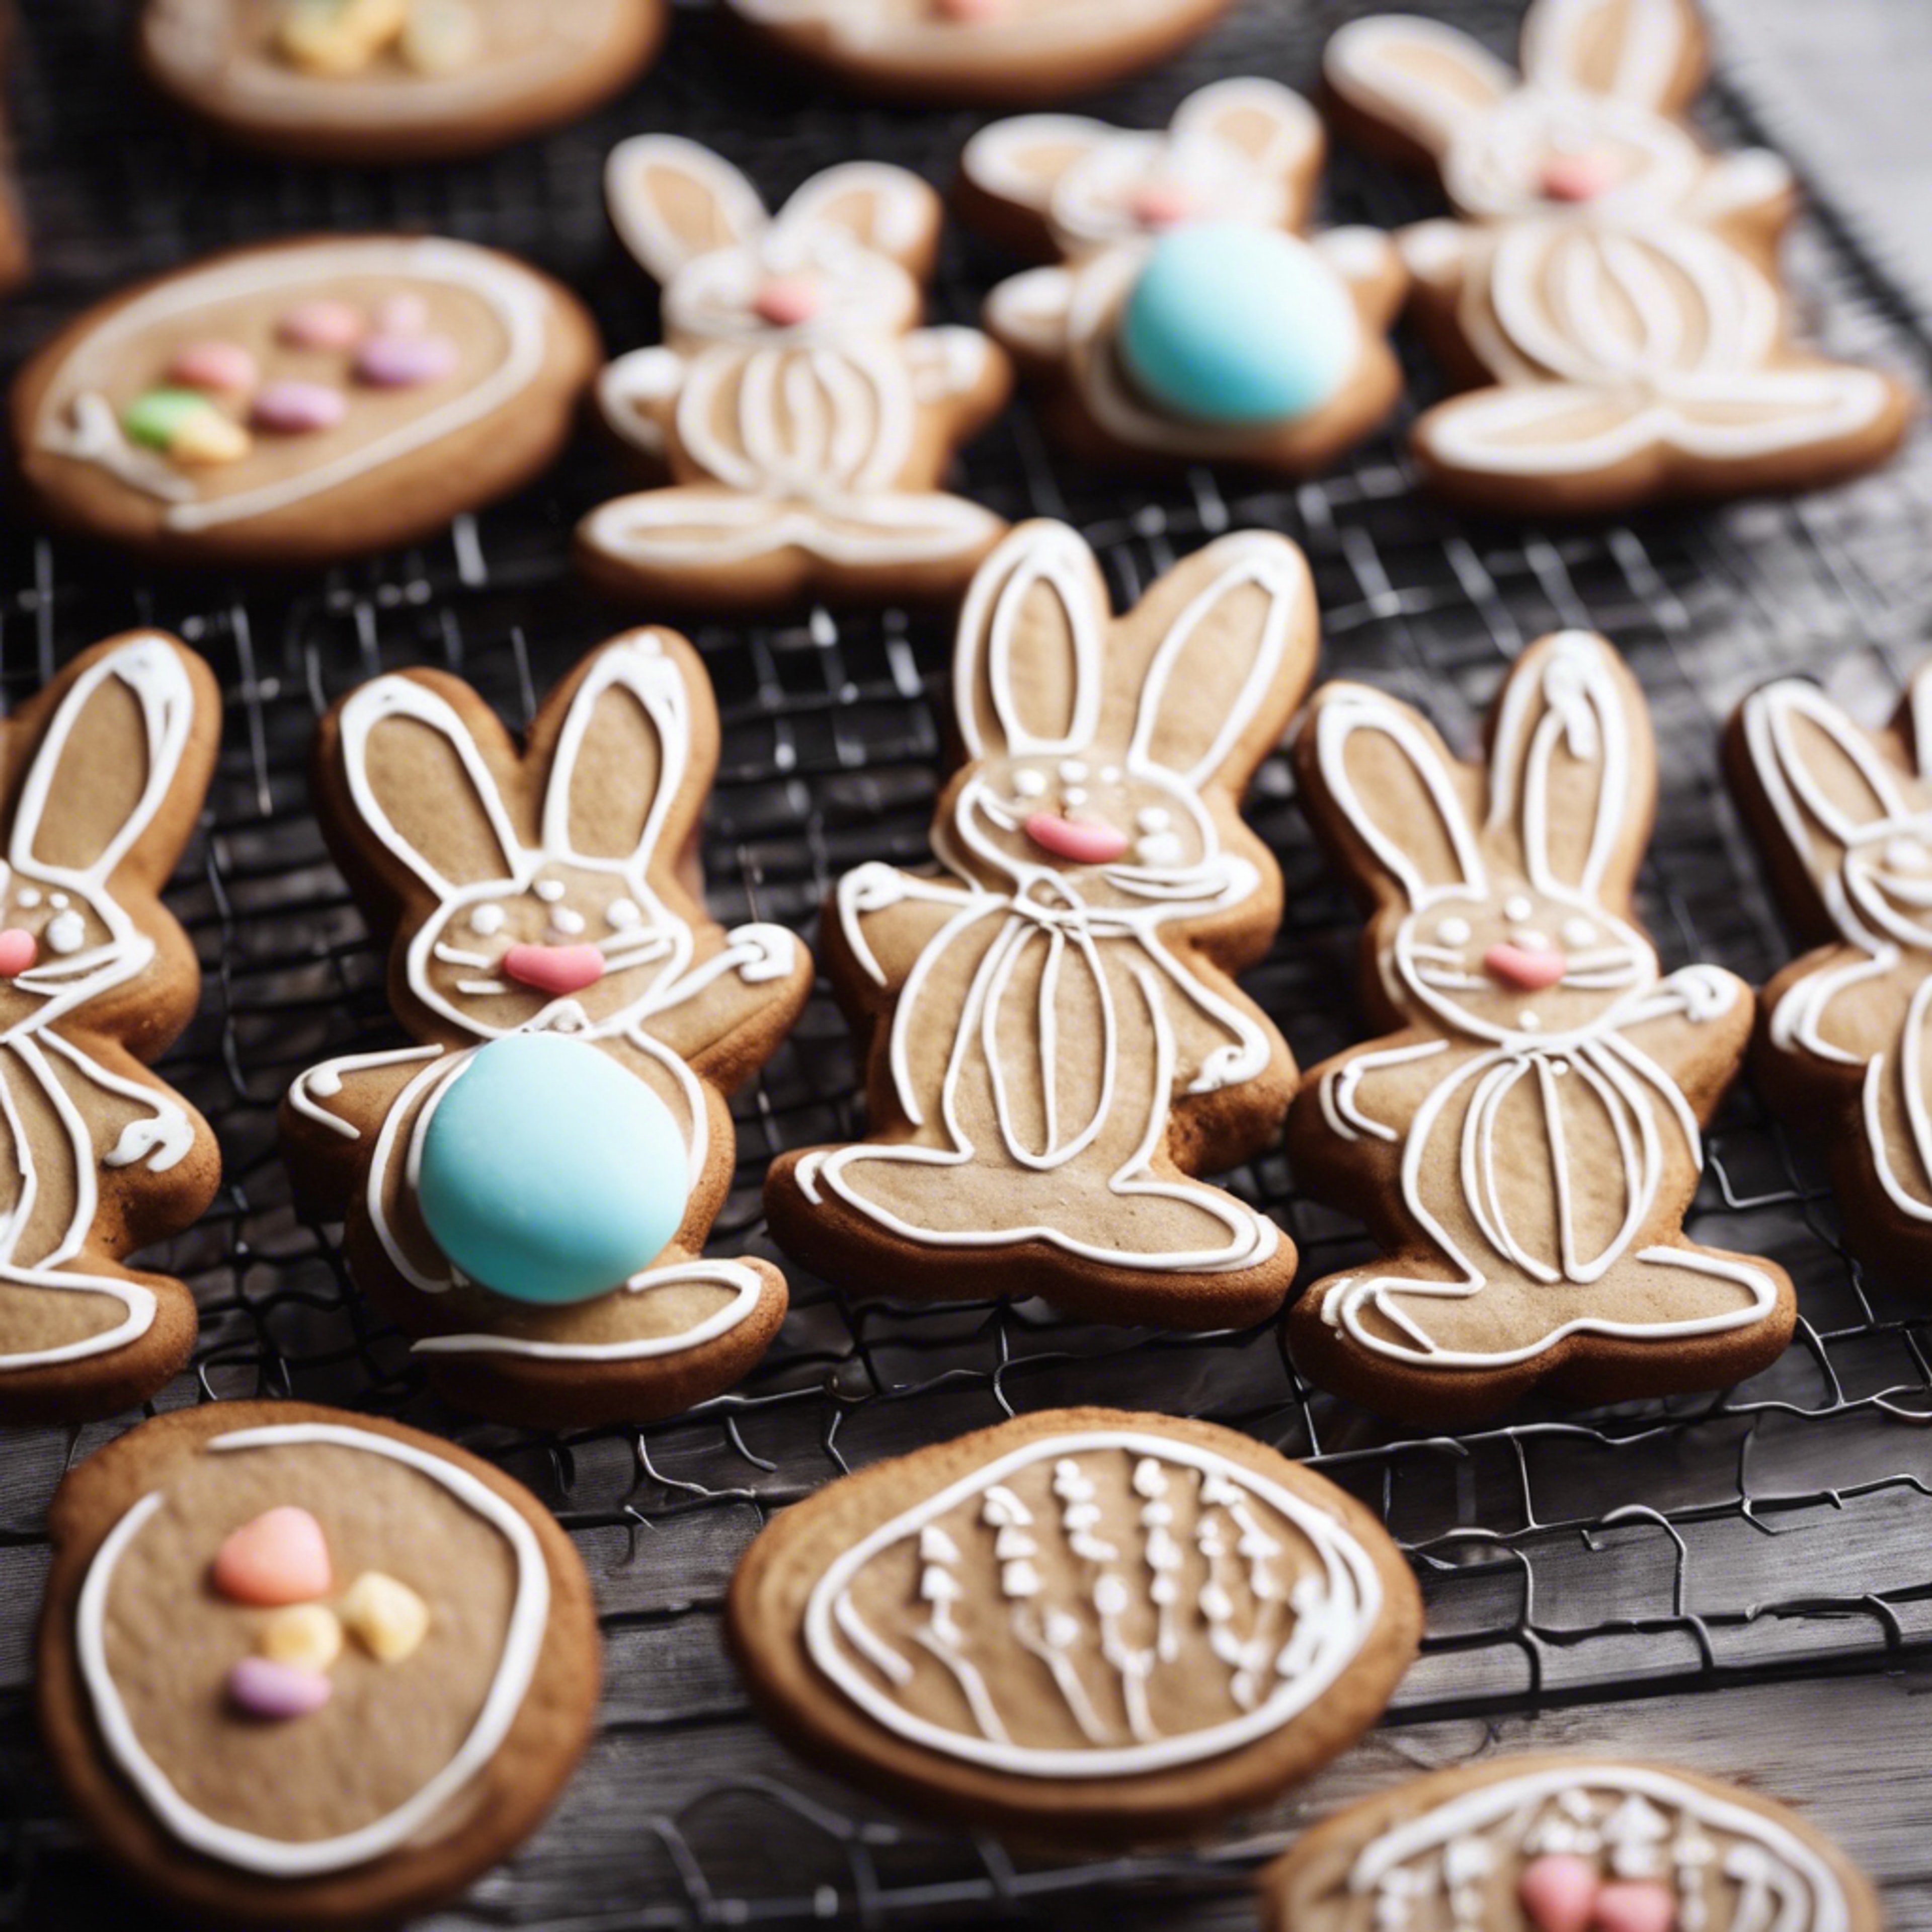 Homemade gingerbread cookies shaped like Easter bunnies and eggs, cooling on a rack. טפט[c62694eb033d400aa62f]